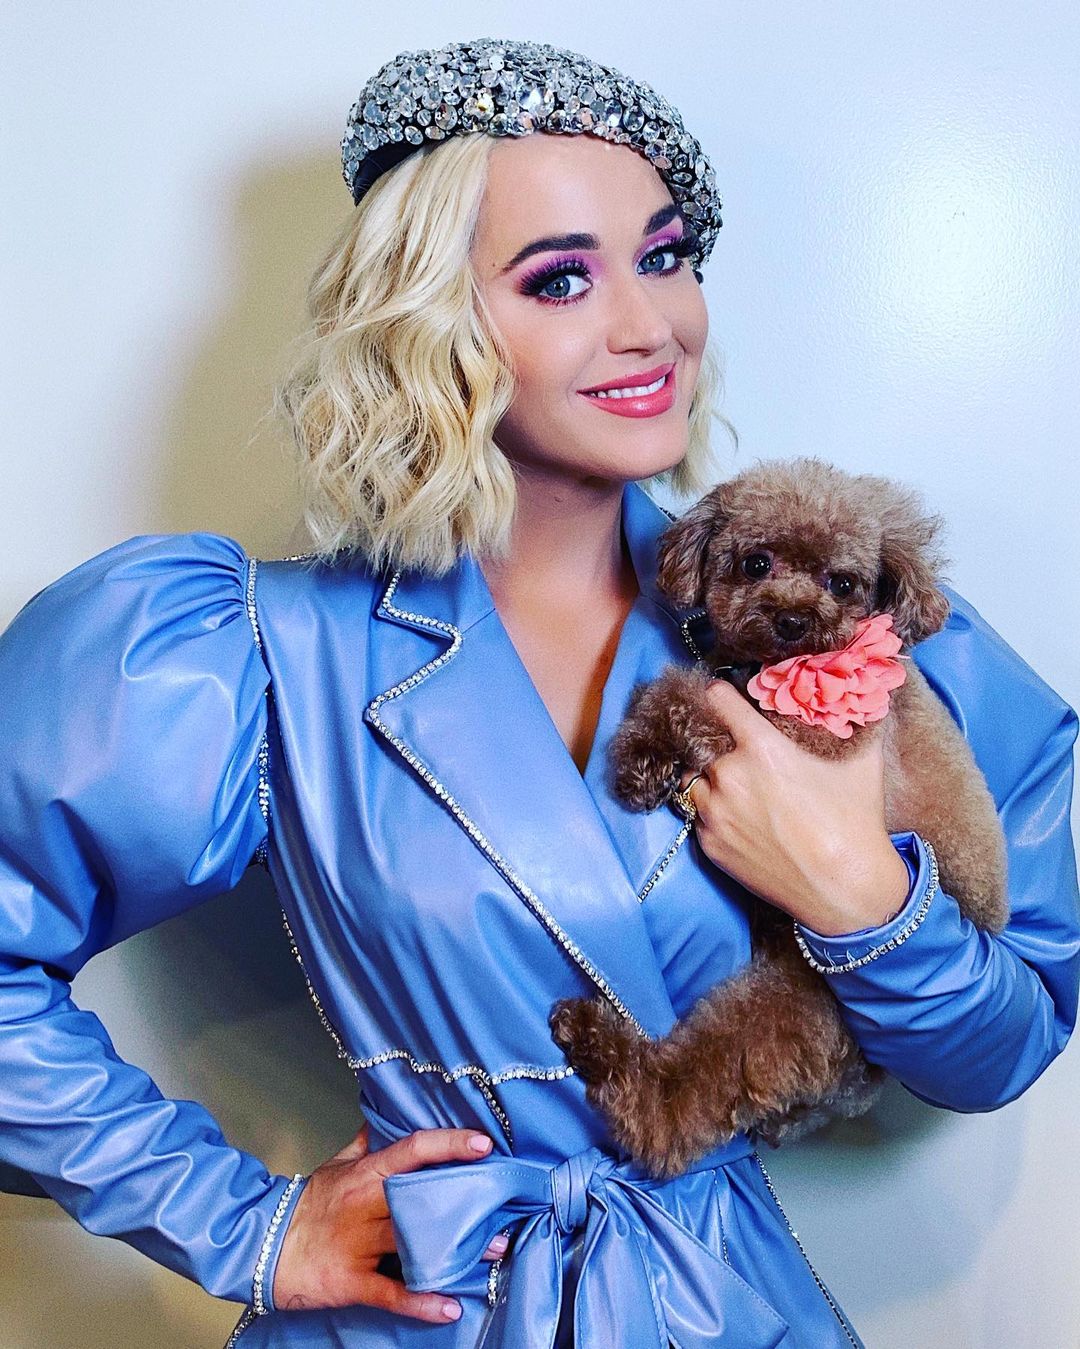 Katy Perry Hairstyle 32 Katy Perry 2023 | Katy Perry blonde hair | Katy Perry bob haircut Katy Perry Hairstyles